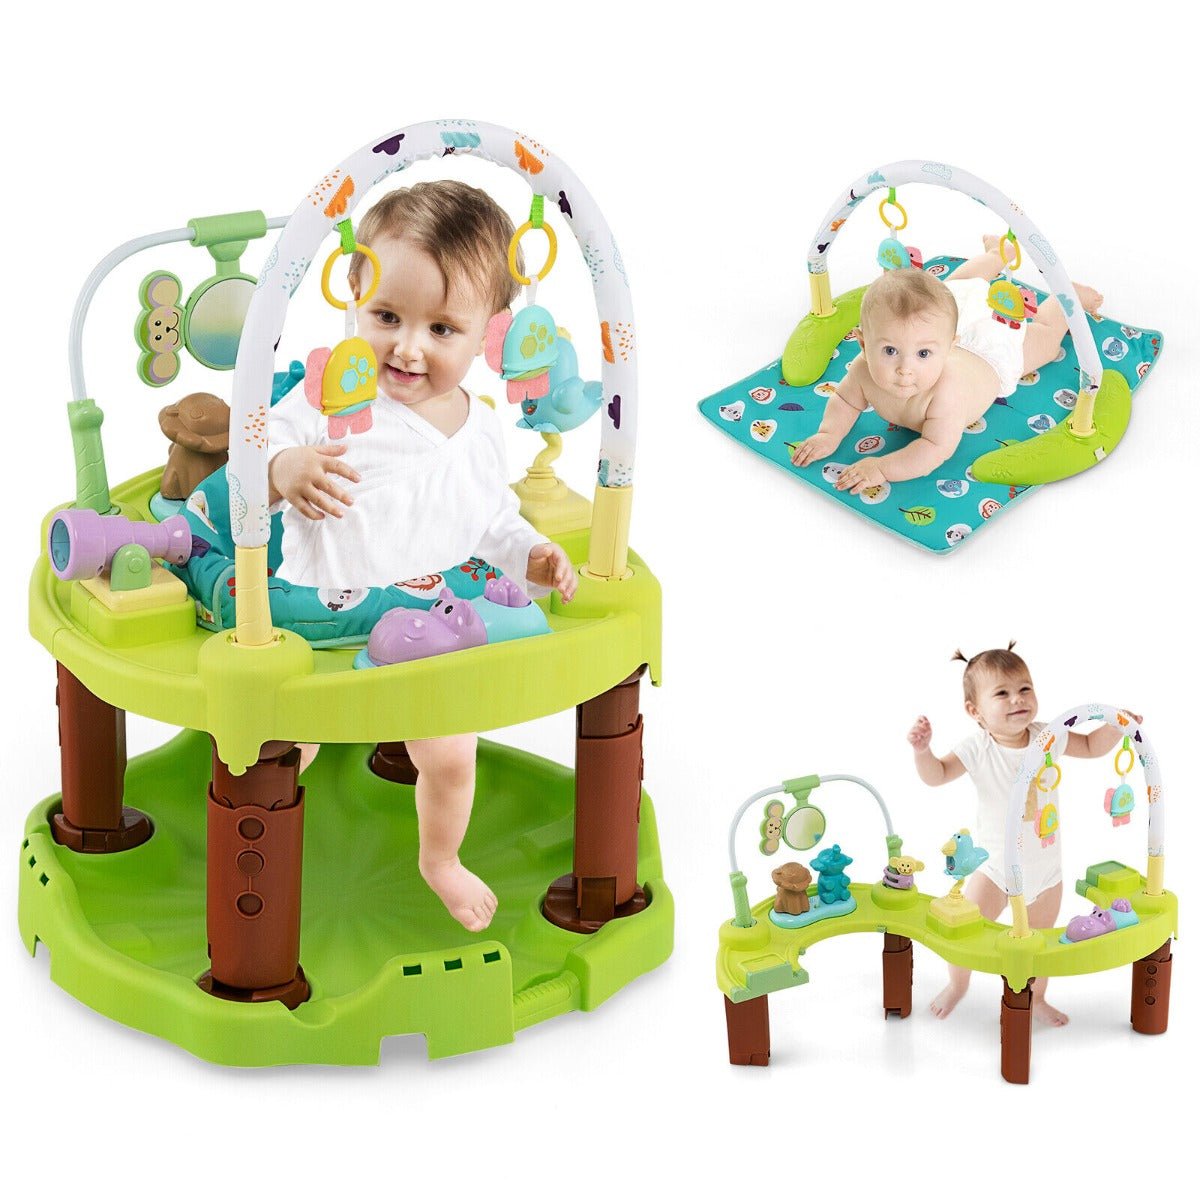 3-in-1 Play Mat, Bouncing Chair, Activity Table